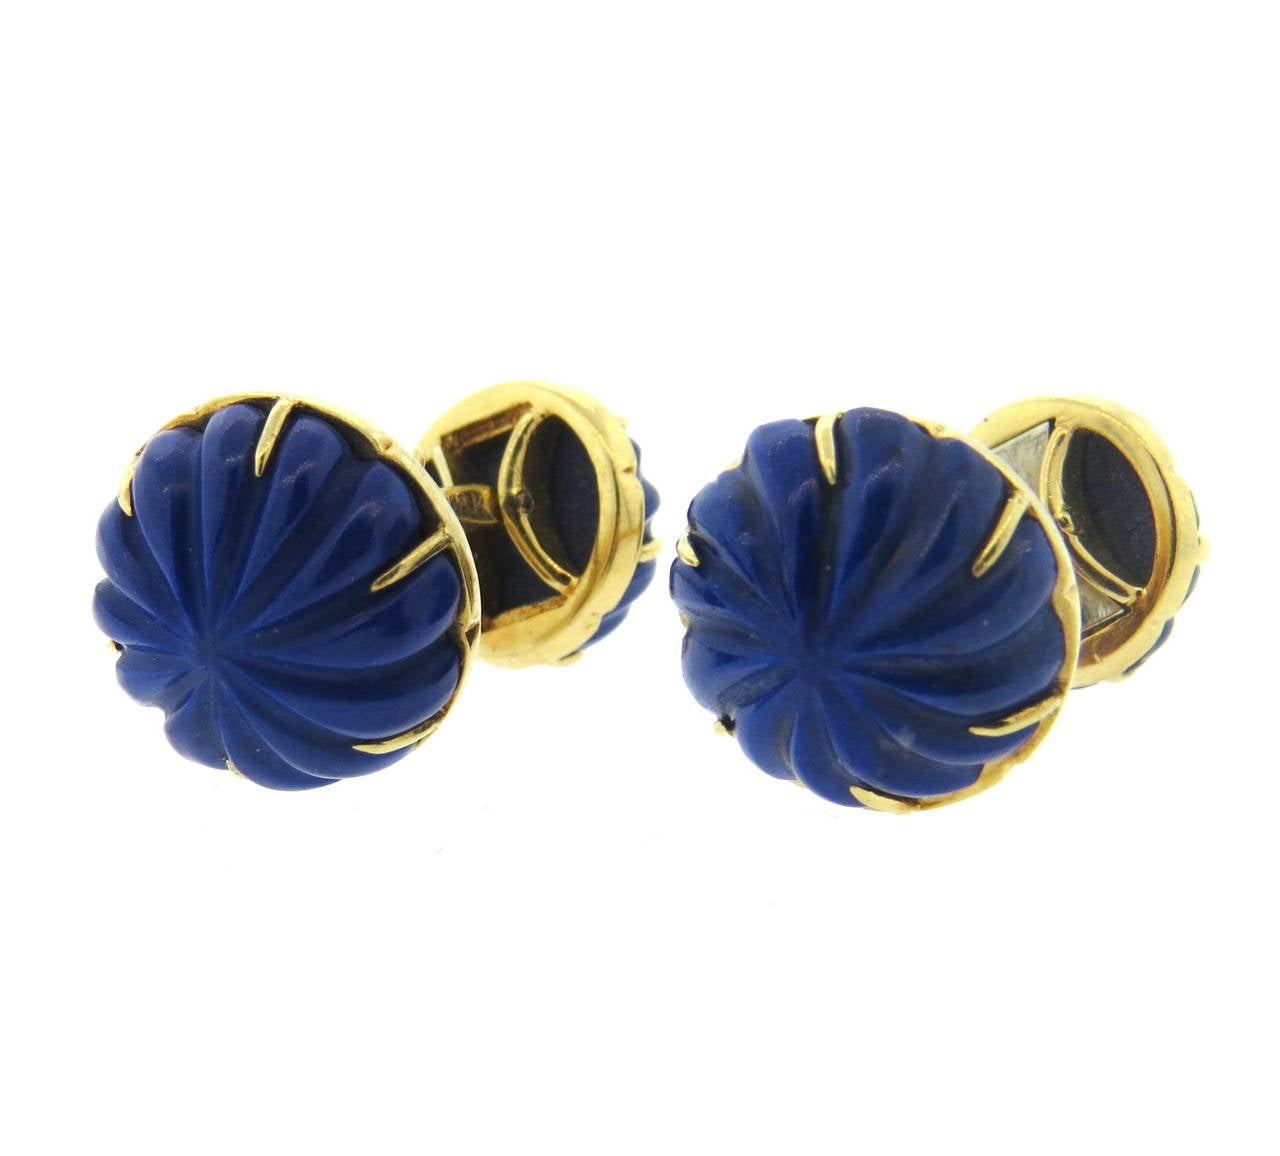 French Tiffany & Co 18k gold cufflinks featuring carved lapis lazuli top and back. Top measures 16.3mm in diameter, back - 12.7mm in diameter. Marked France,18k and Tiffany & Co. weight - 16.8 grams